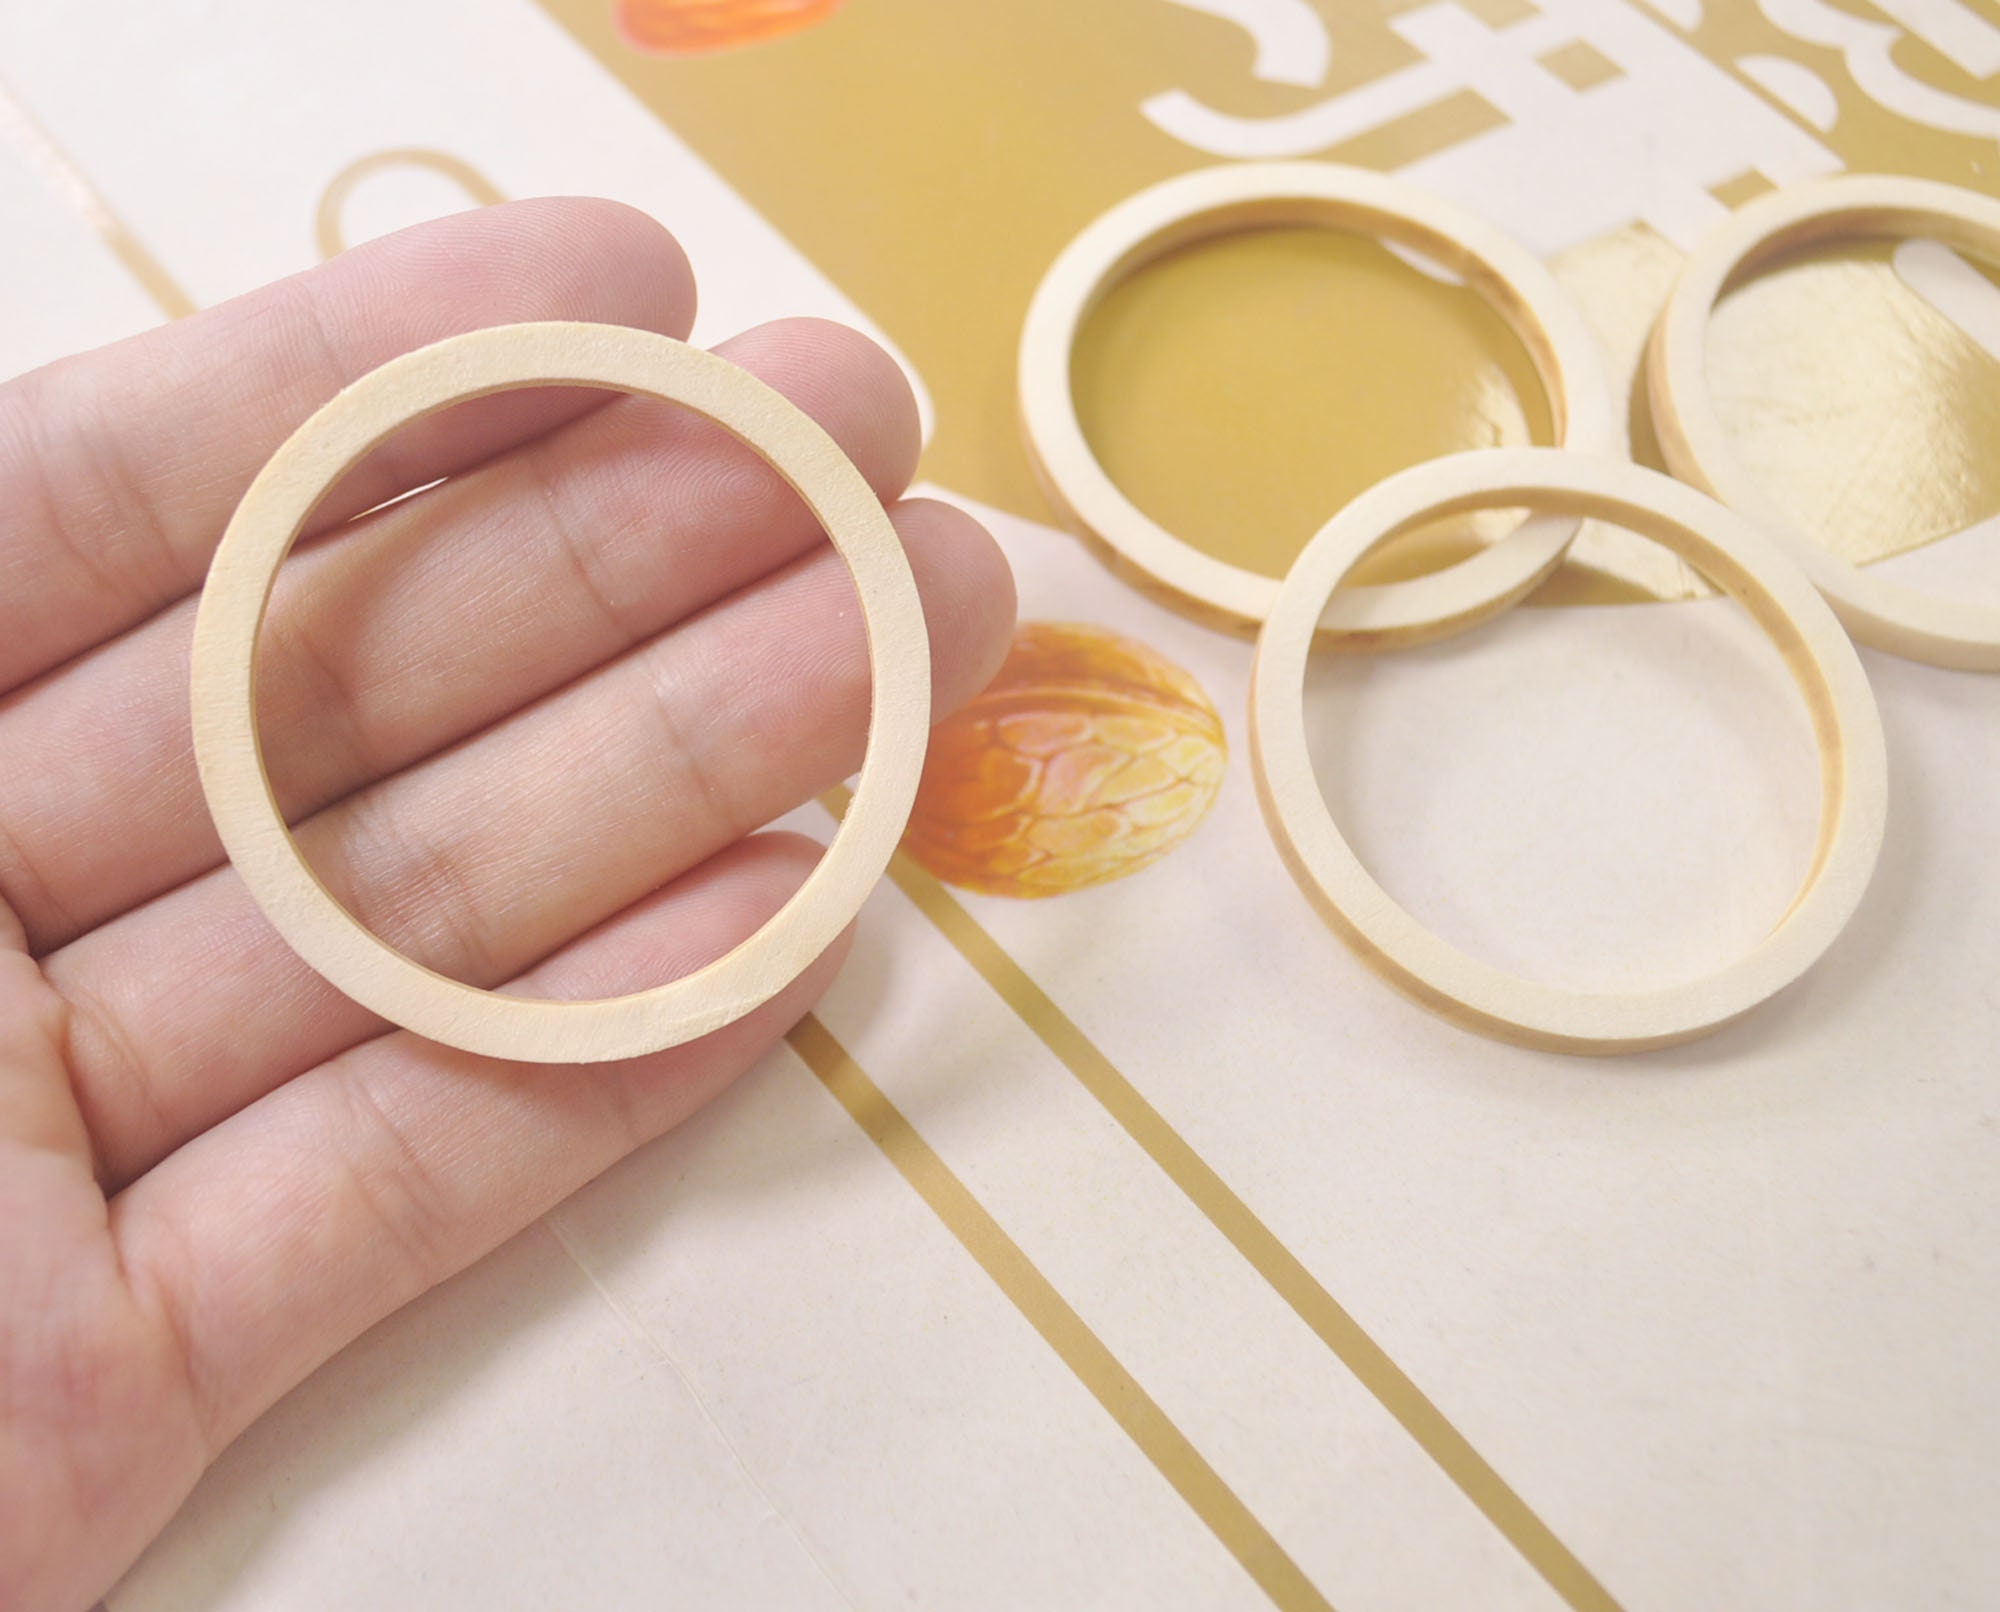 50 Pcs Natural Wood Rings Unfinished Wooden Craft Loop Rings for DIY  Connectors, Ring Pendant and Jewelry Making (45 MM)